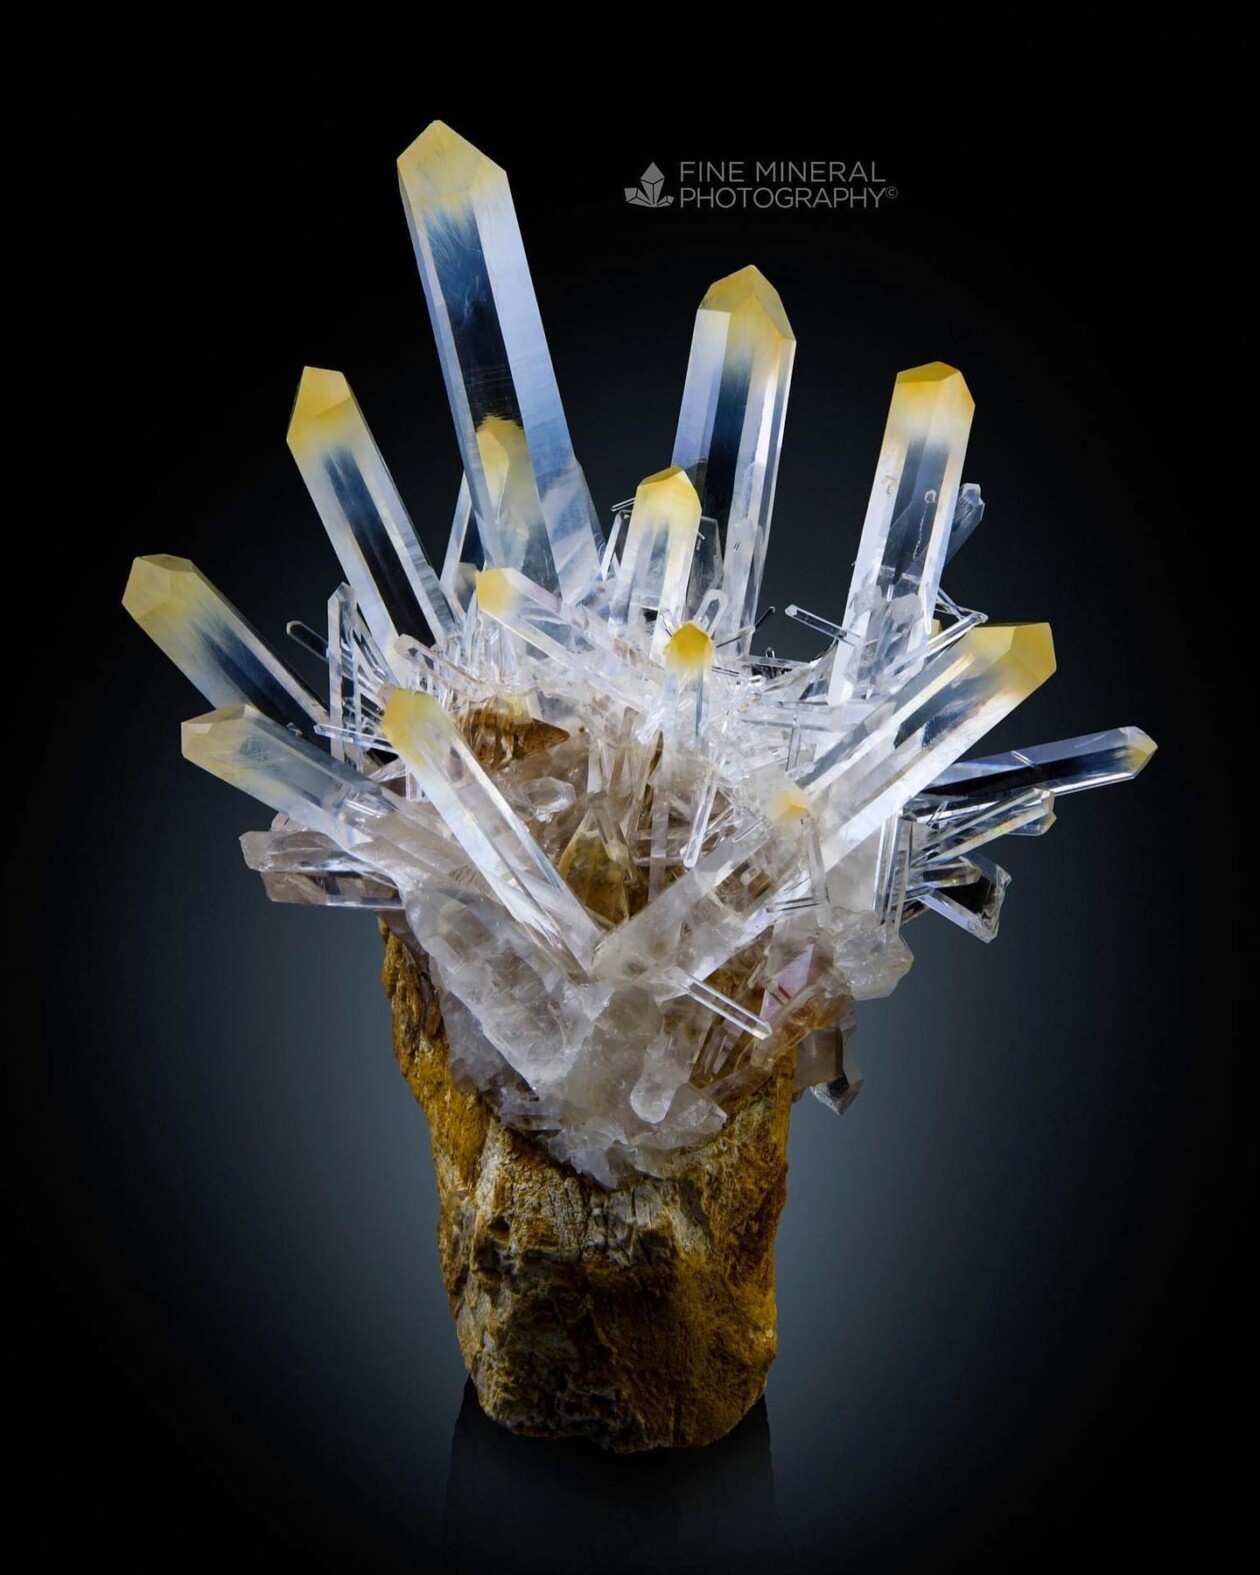 The Magnificent Mineral Photography Of Laszlo Kupi (1)